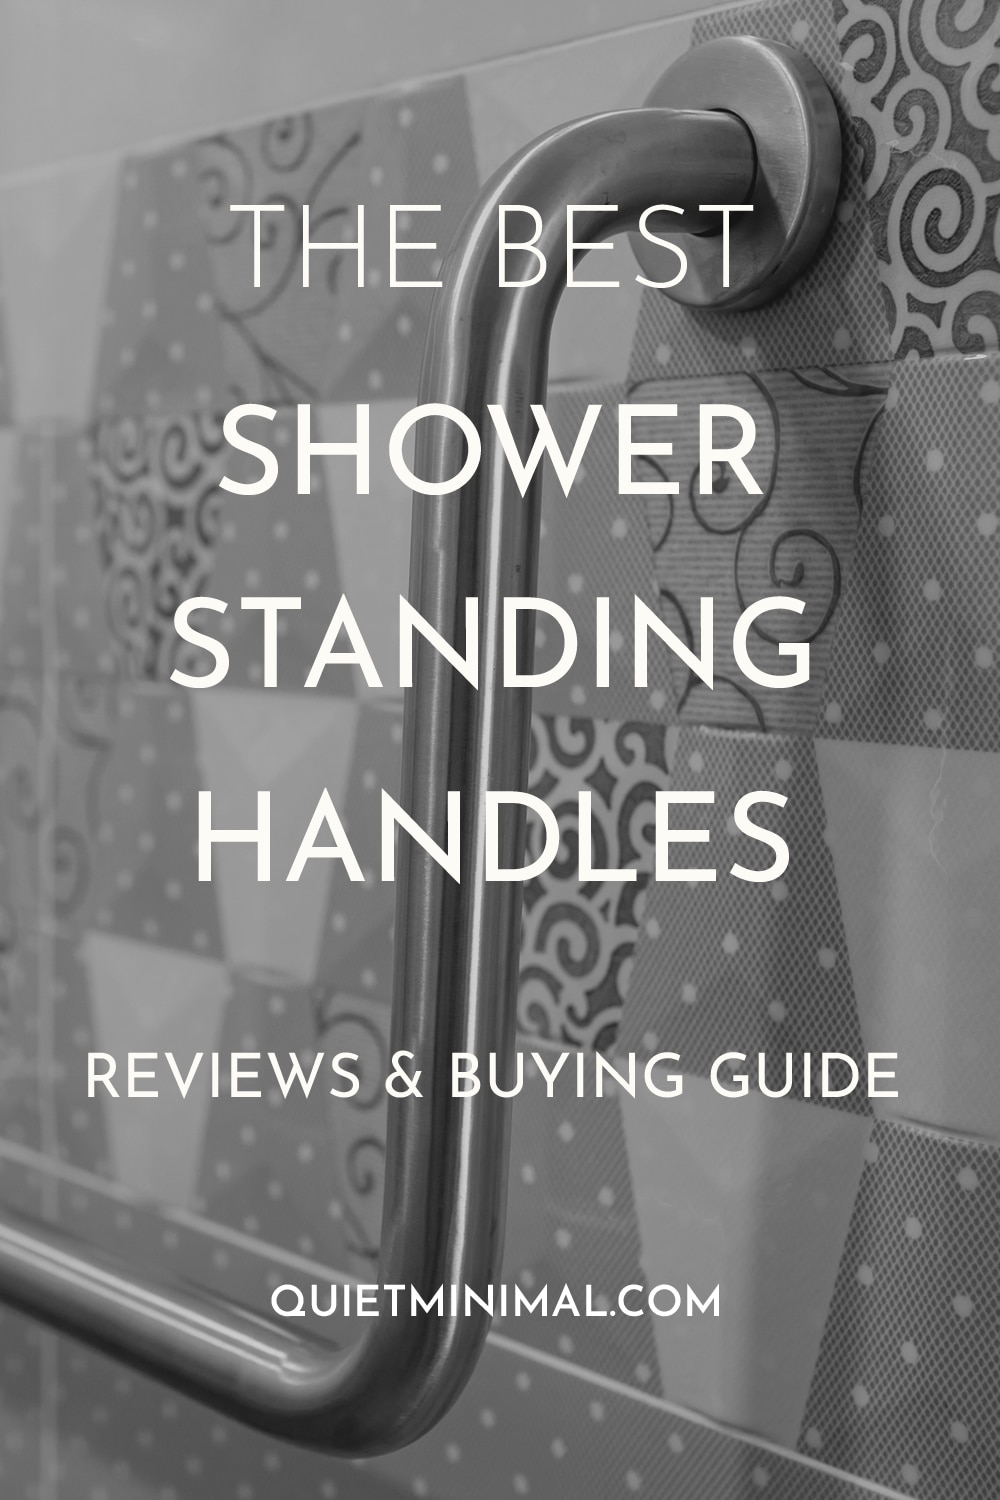 The Best Shower Standing Handle Reviews & Buying Guide